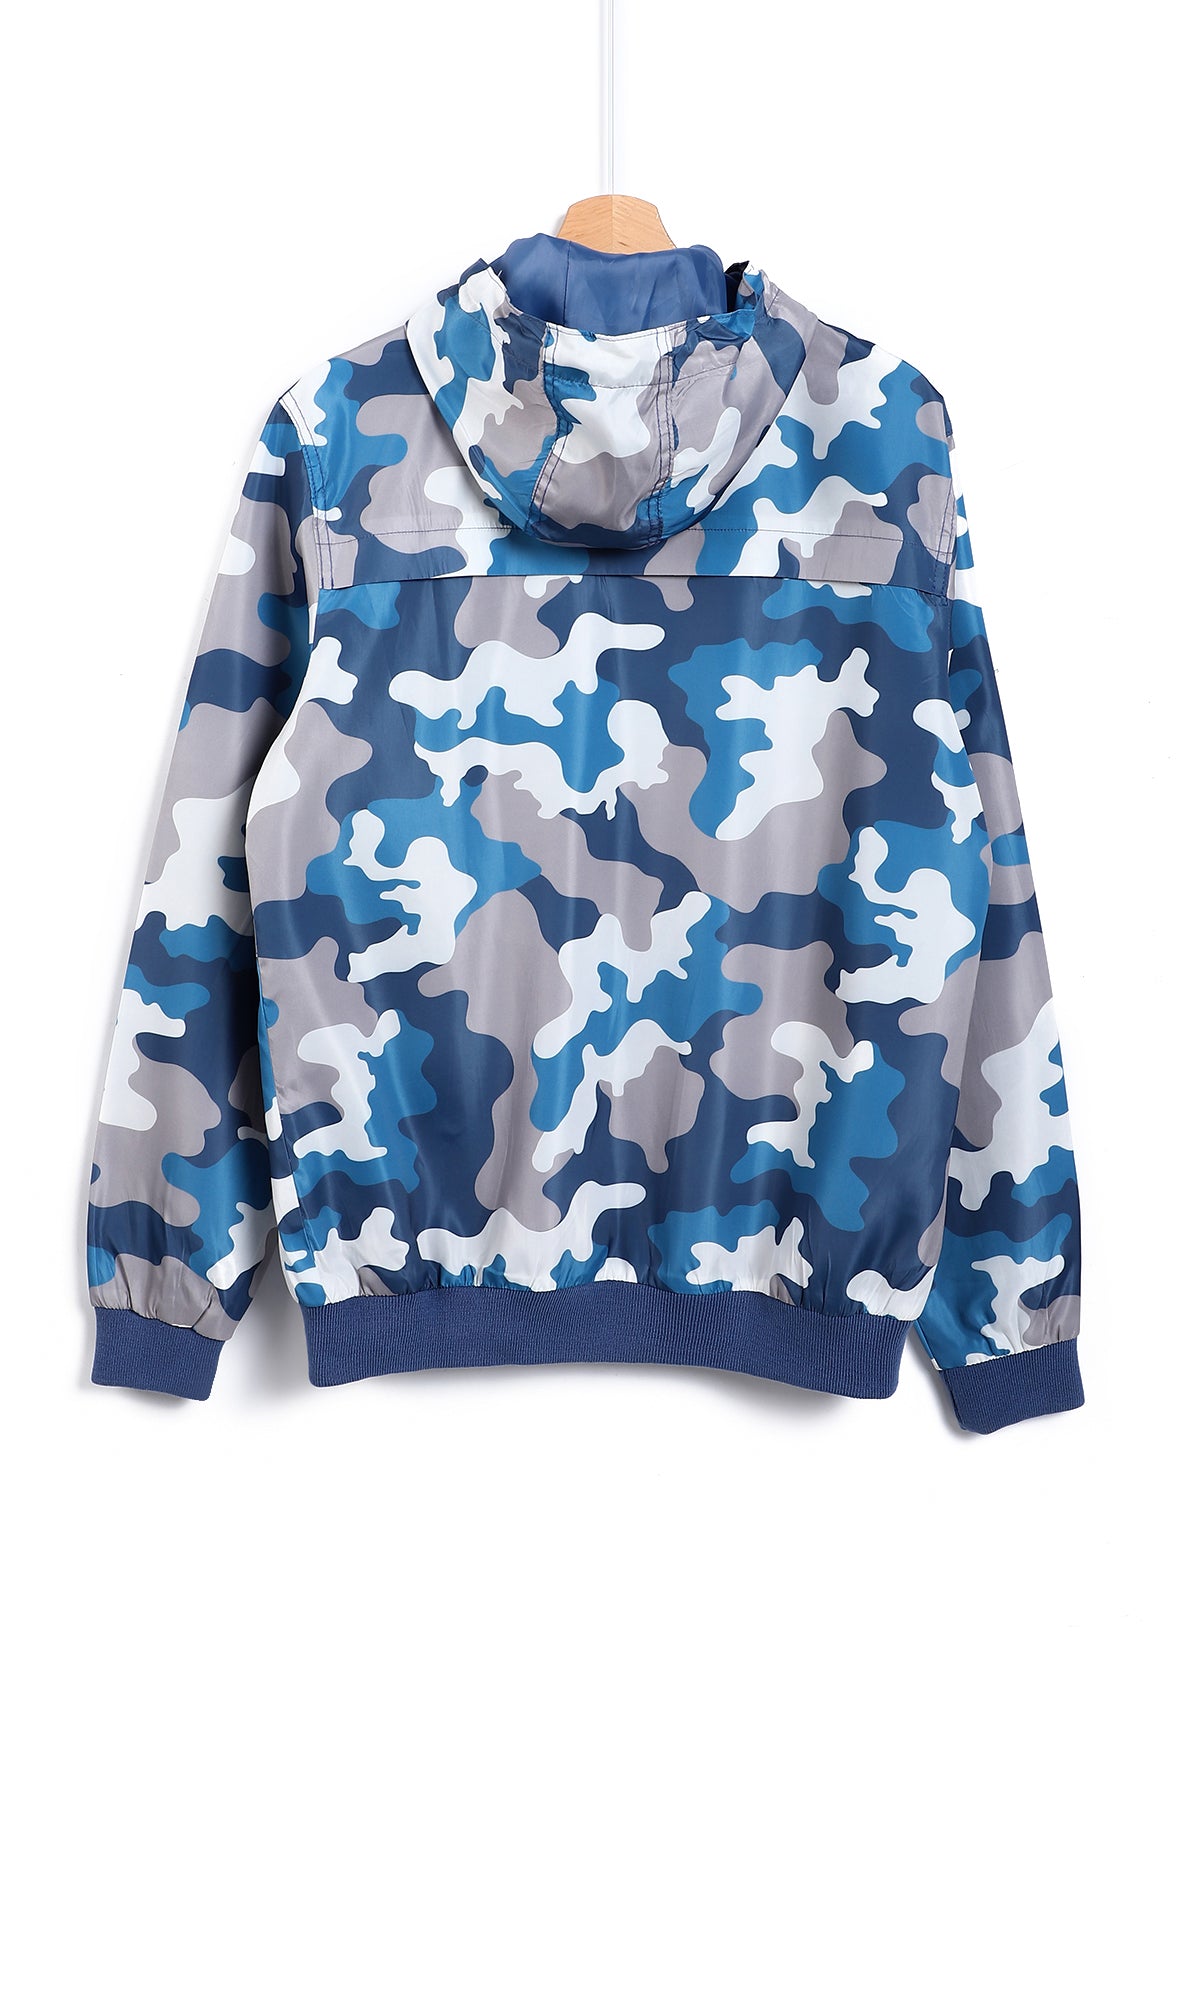 O157785 Camouflage Hooded Jacket With Zipped Front Pockets - Blue, White & Grey